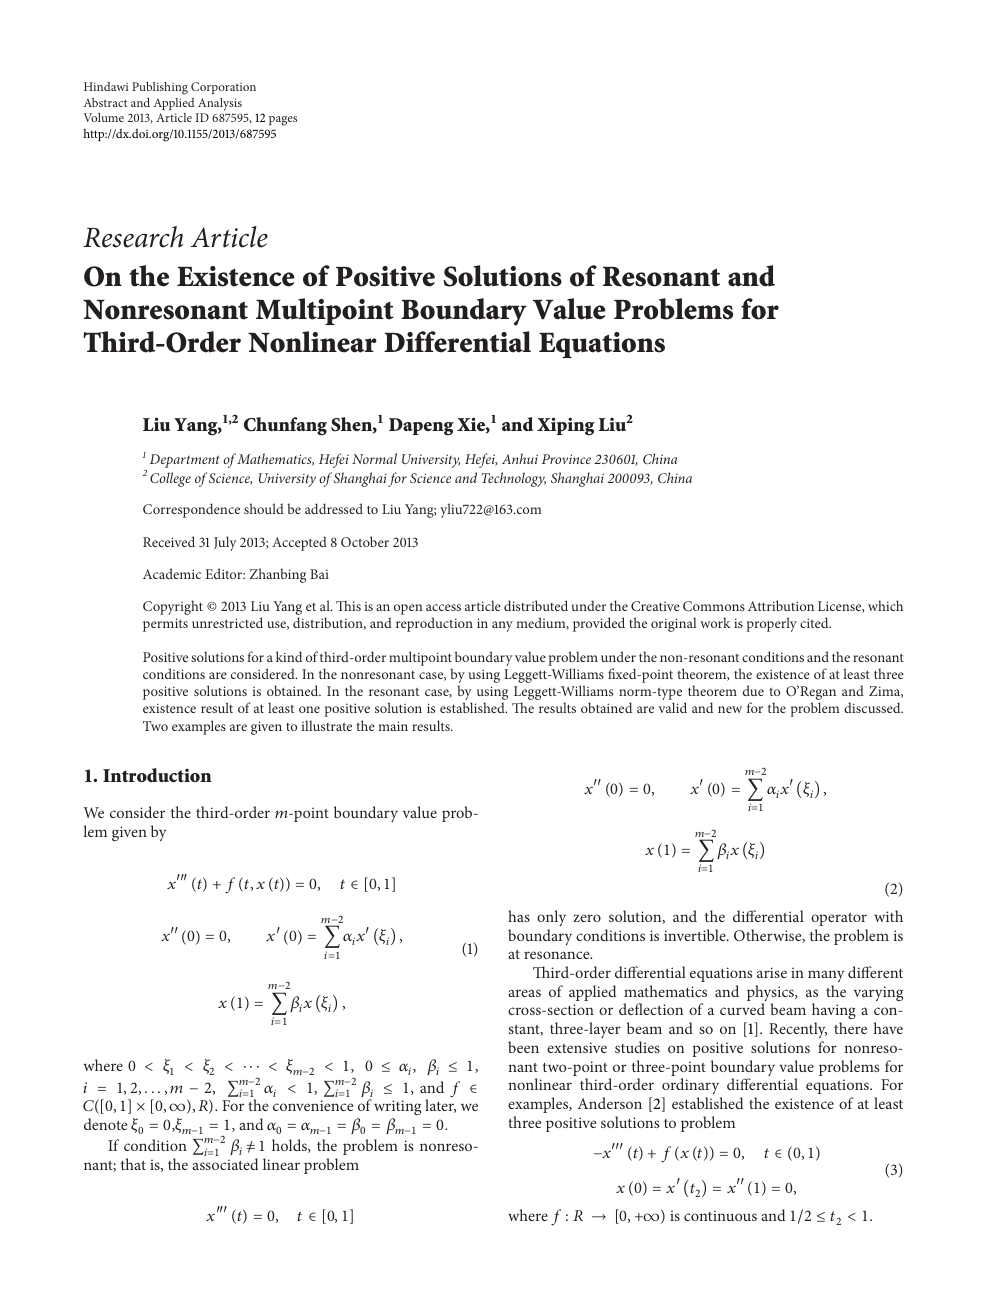 On The Existence Of Positive Solutions Of Resonant And Nonresonant Multipoint Boundary Value Problems For Third Order Nonlinear Differential Equations Topic Of Research Paper In Mathematics Download Scholarly Article Pdf And Read